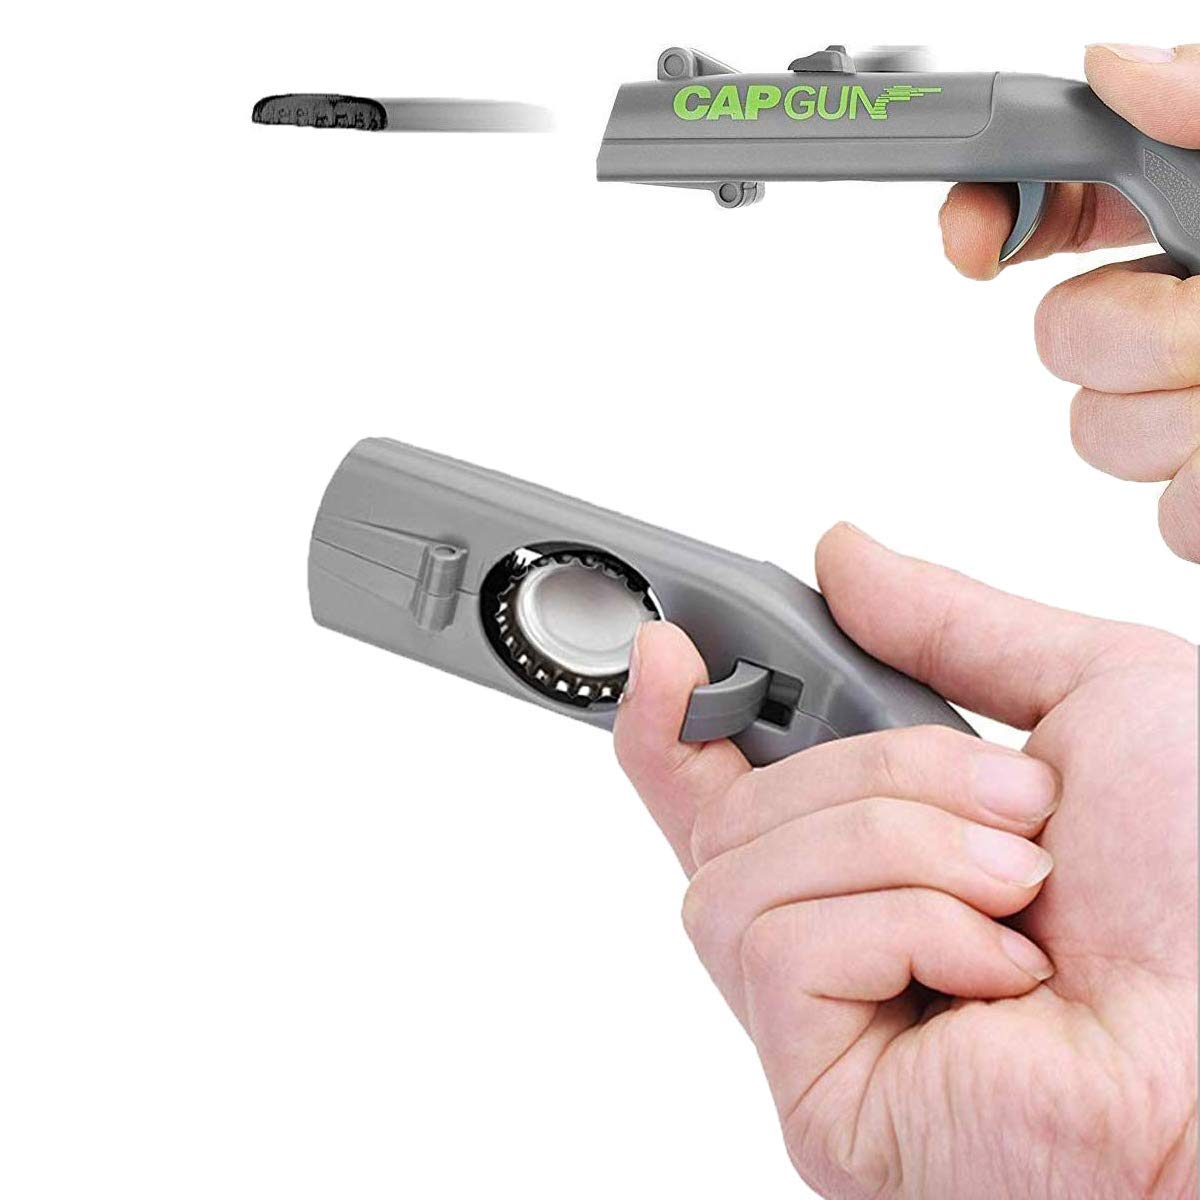 ABS-Creative-Cap-Launcher-Shooter-Bottle-Opener-Magnetic-Drink-Opener-for-Home-Party-Drinking-1565128